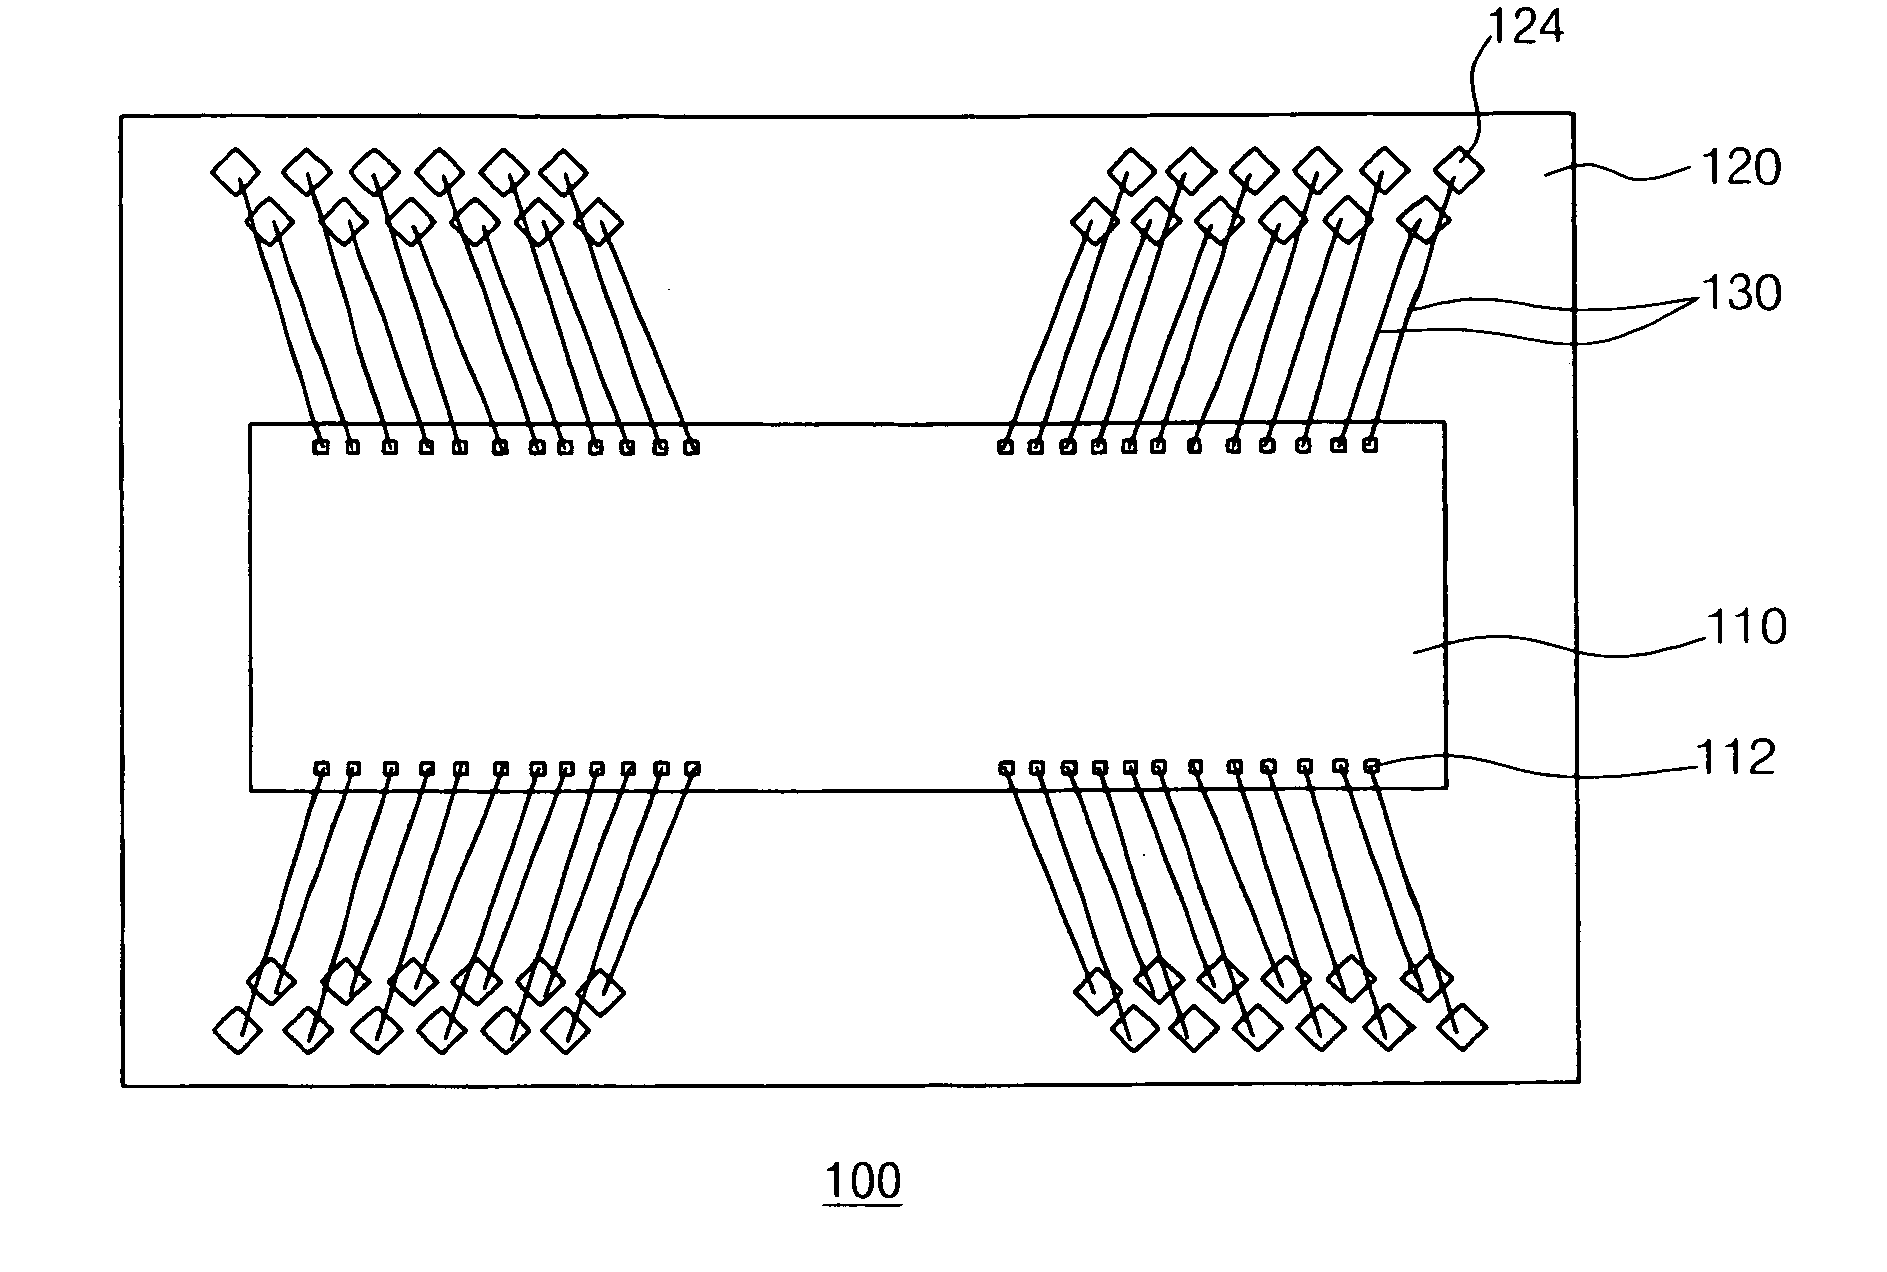 Semiconductor package having optimal interval between bond fingers for reduced substrate size